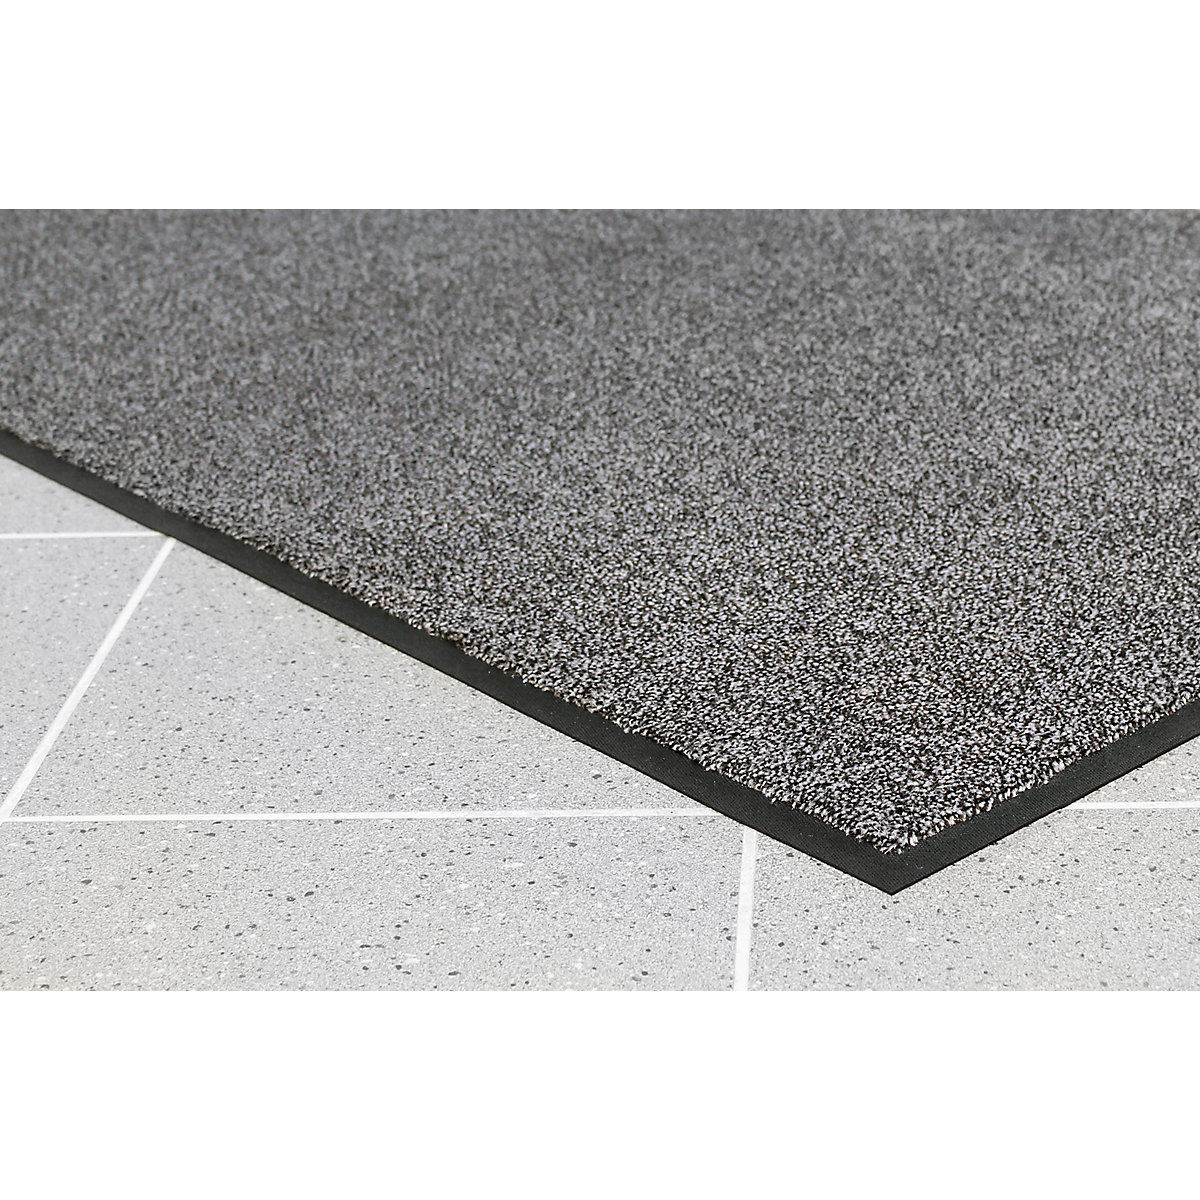 Entrance matting for indoor use, nylon pile – COBA, LxW 1500 x 850 mm, charcoal-5